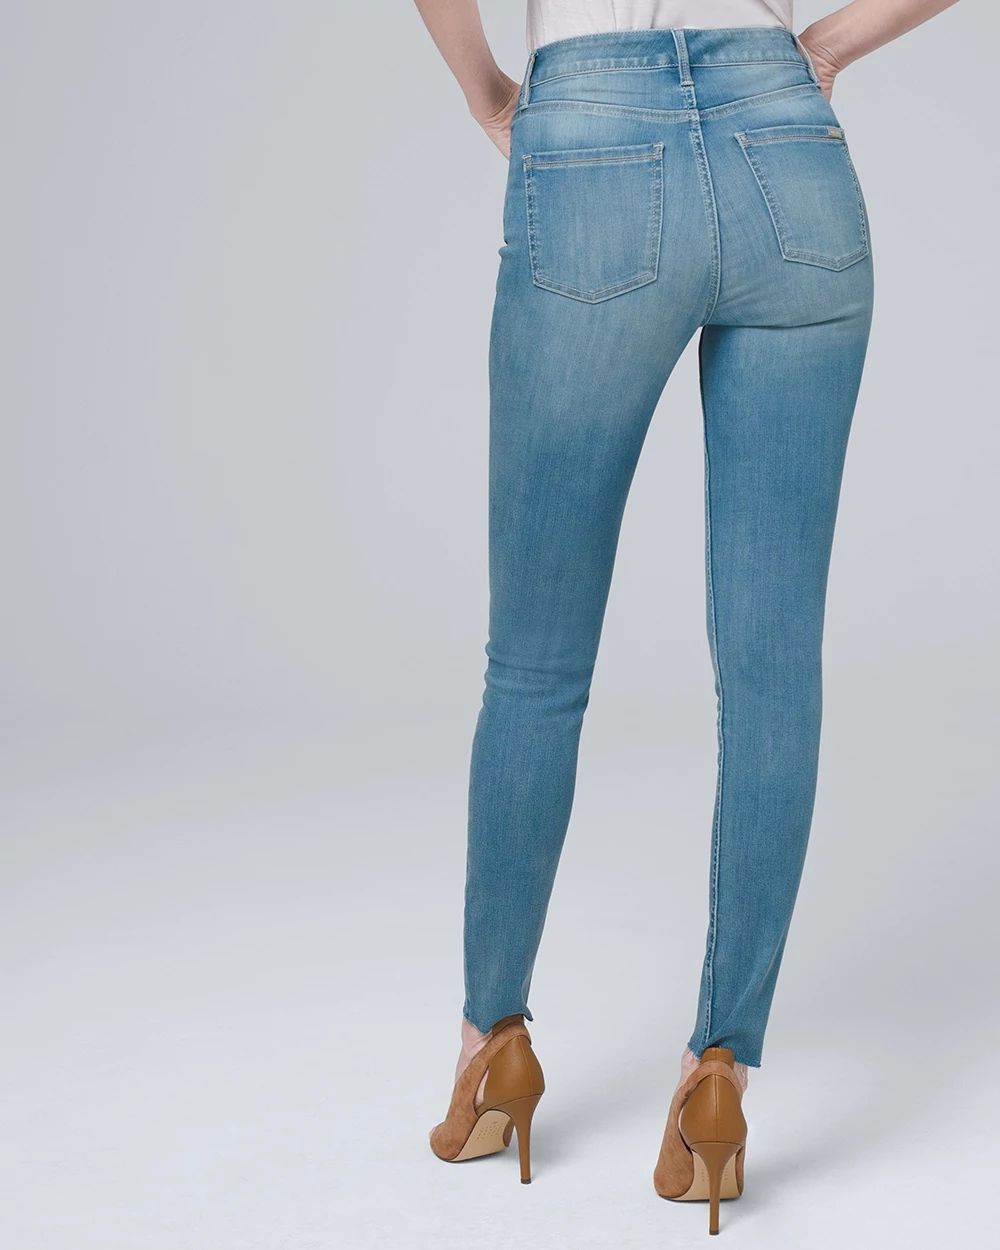 Sculpt High-Rise Raw-Hem Skinny Ankle Jeans click to view larger image.